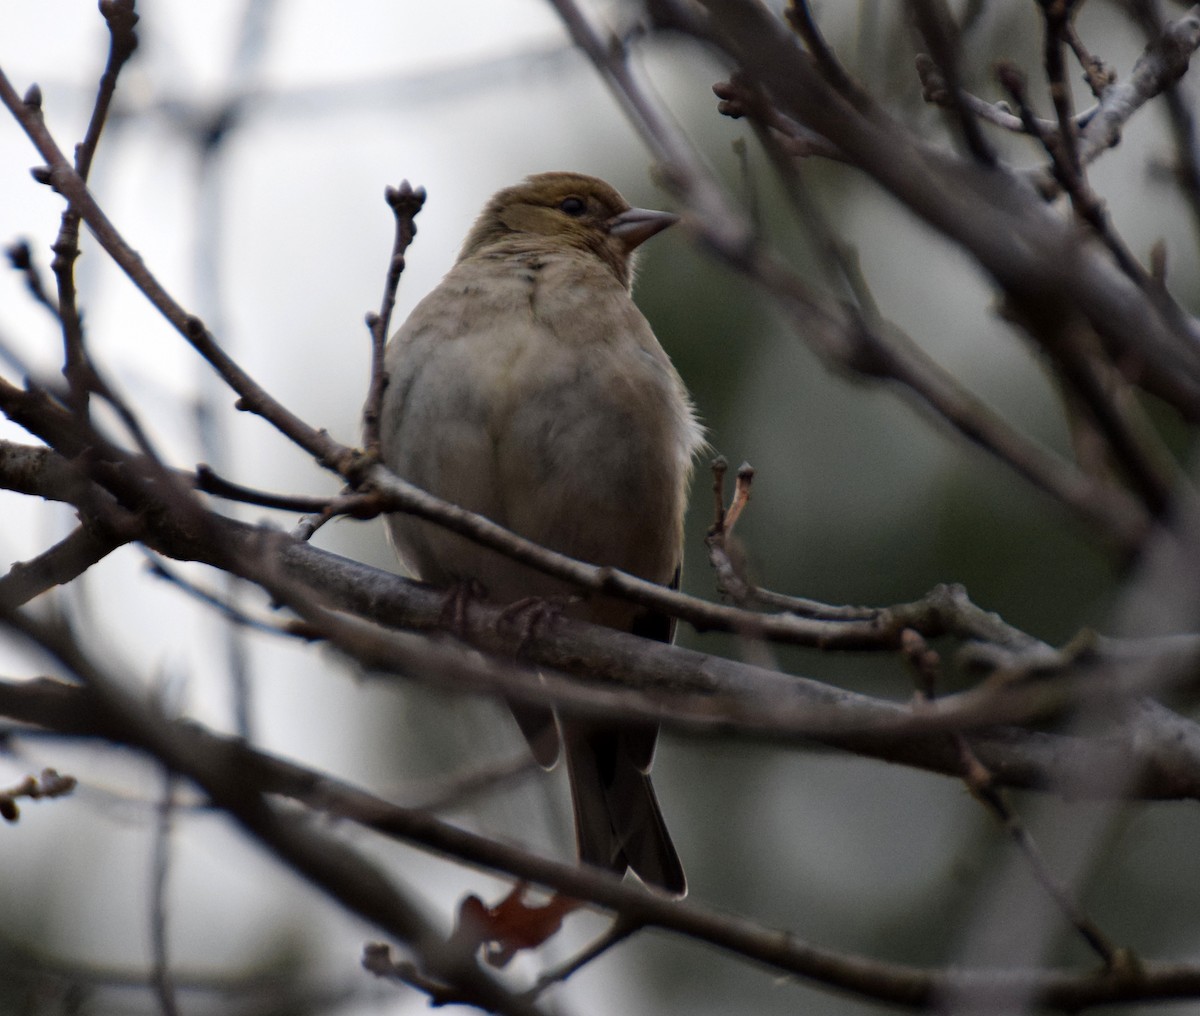 Common Chaffinch - A Emmerson